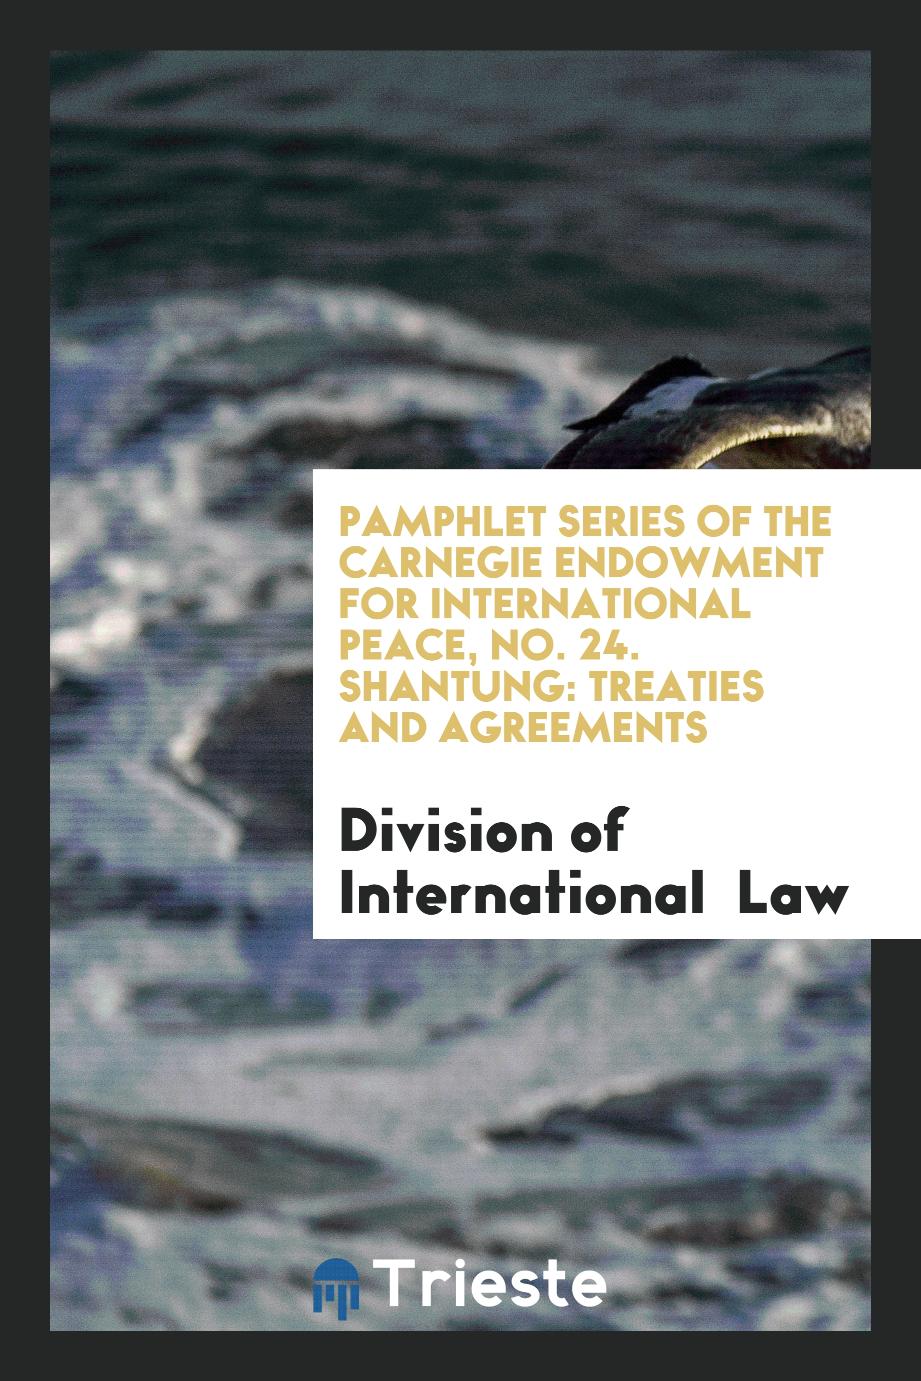 Pamphlet Series of the Carnegie Endowment for International Peace, No. 24. Shantung: Treaties and Agreements